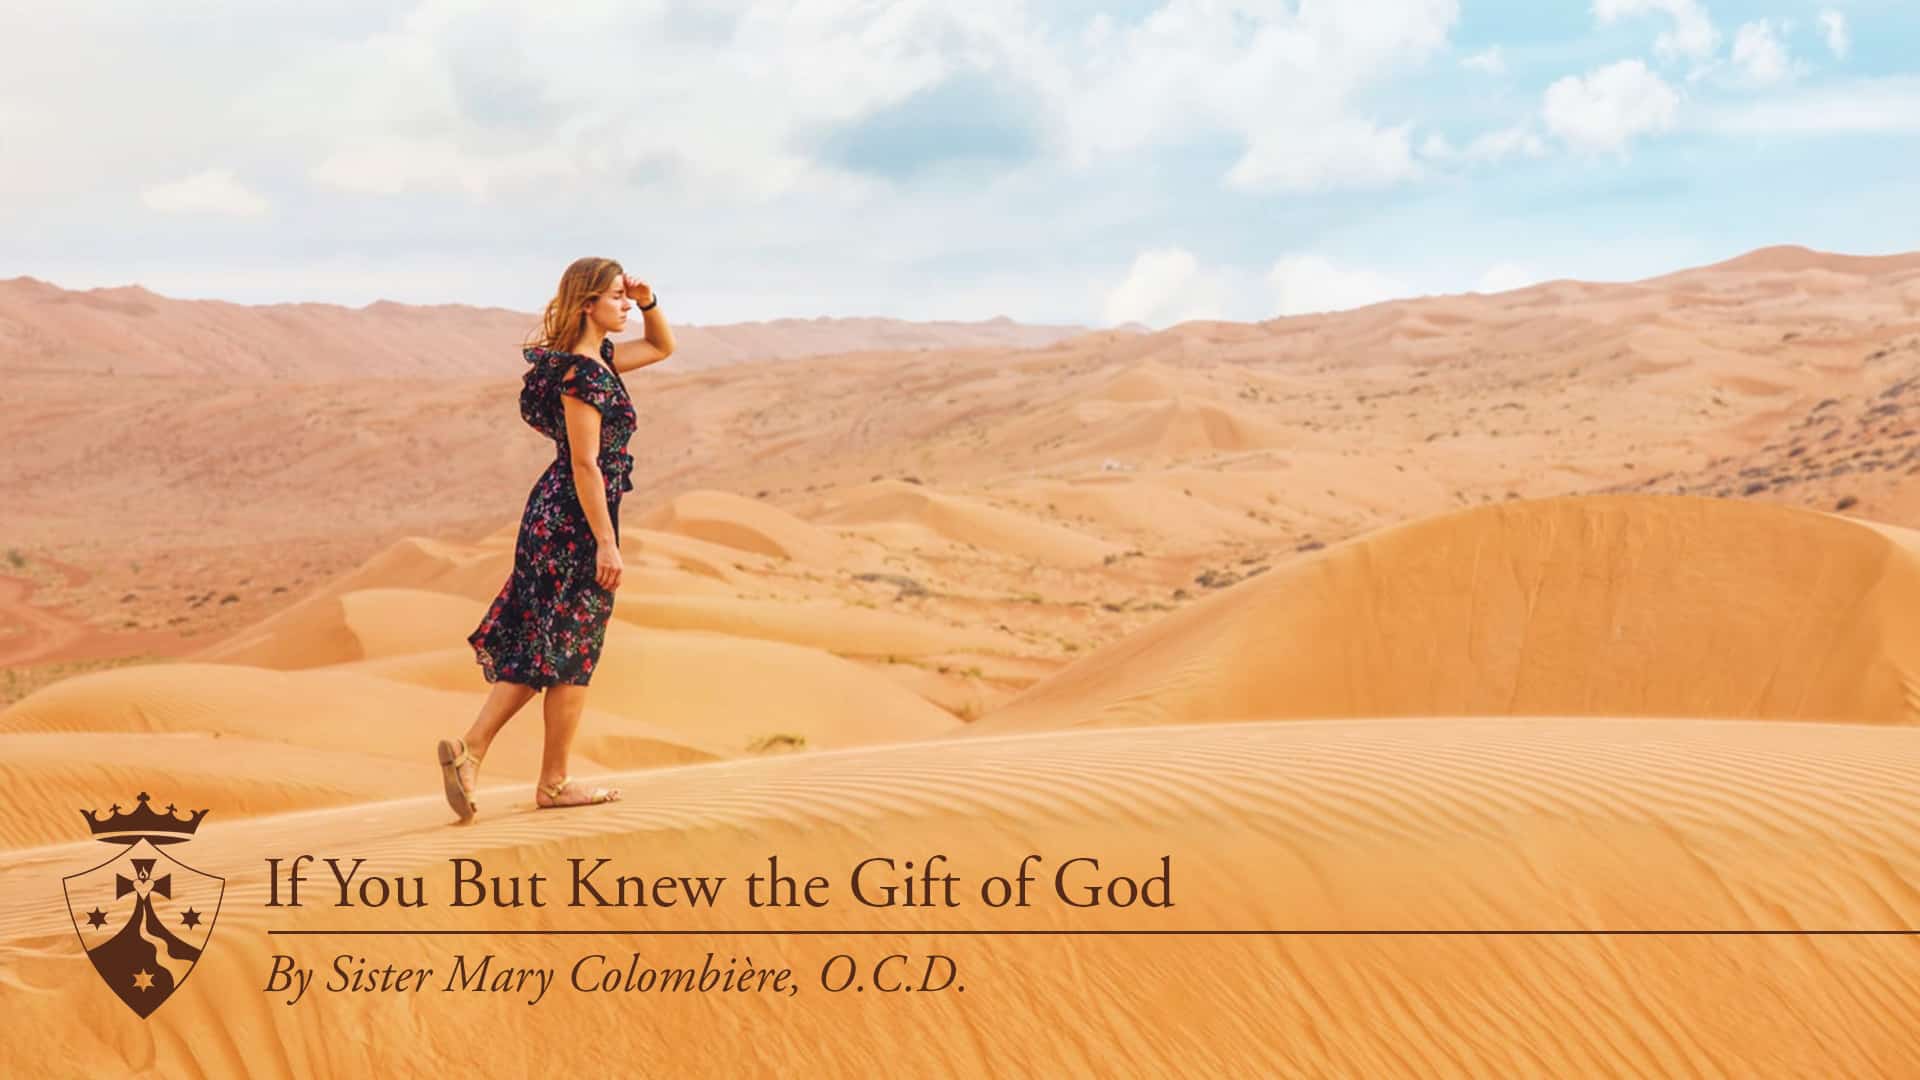 woman walking in desert hills, 'If You But Knew the Gift of God, by Sister Mary Colombiere, O.C.D.'